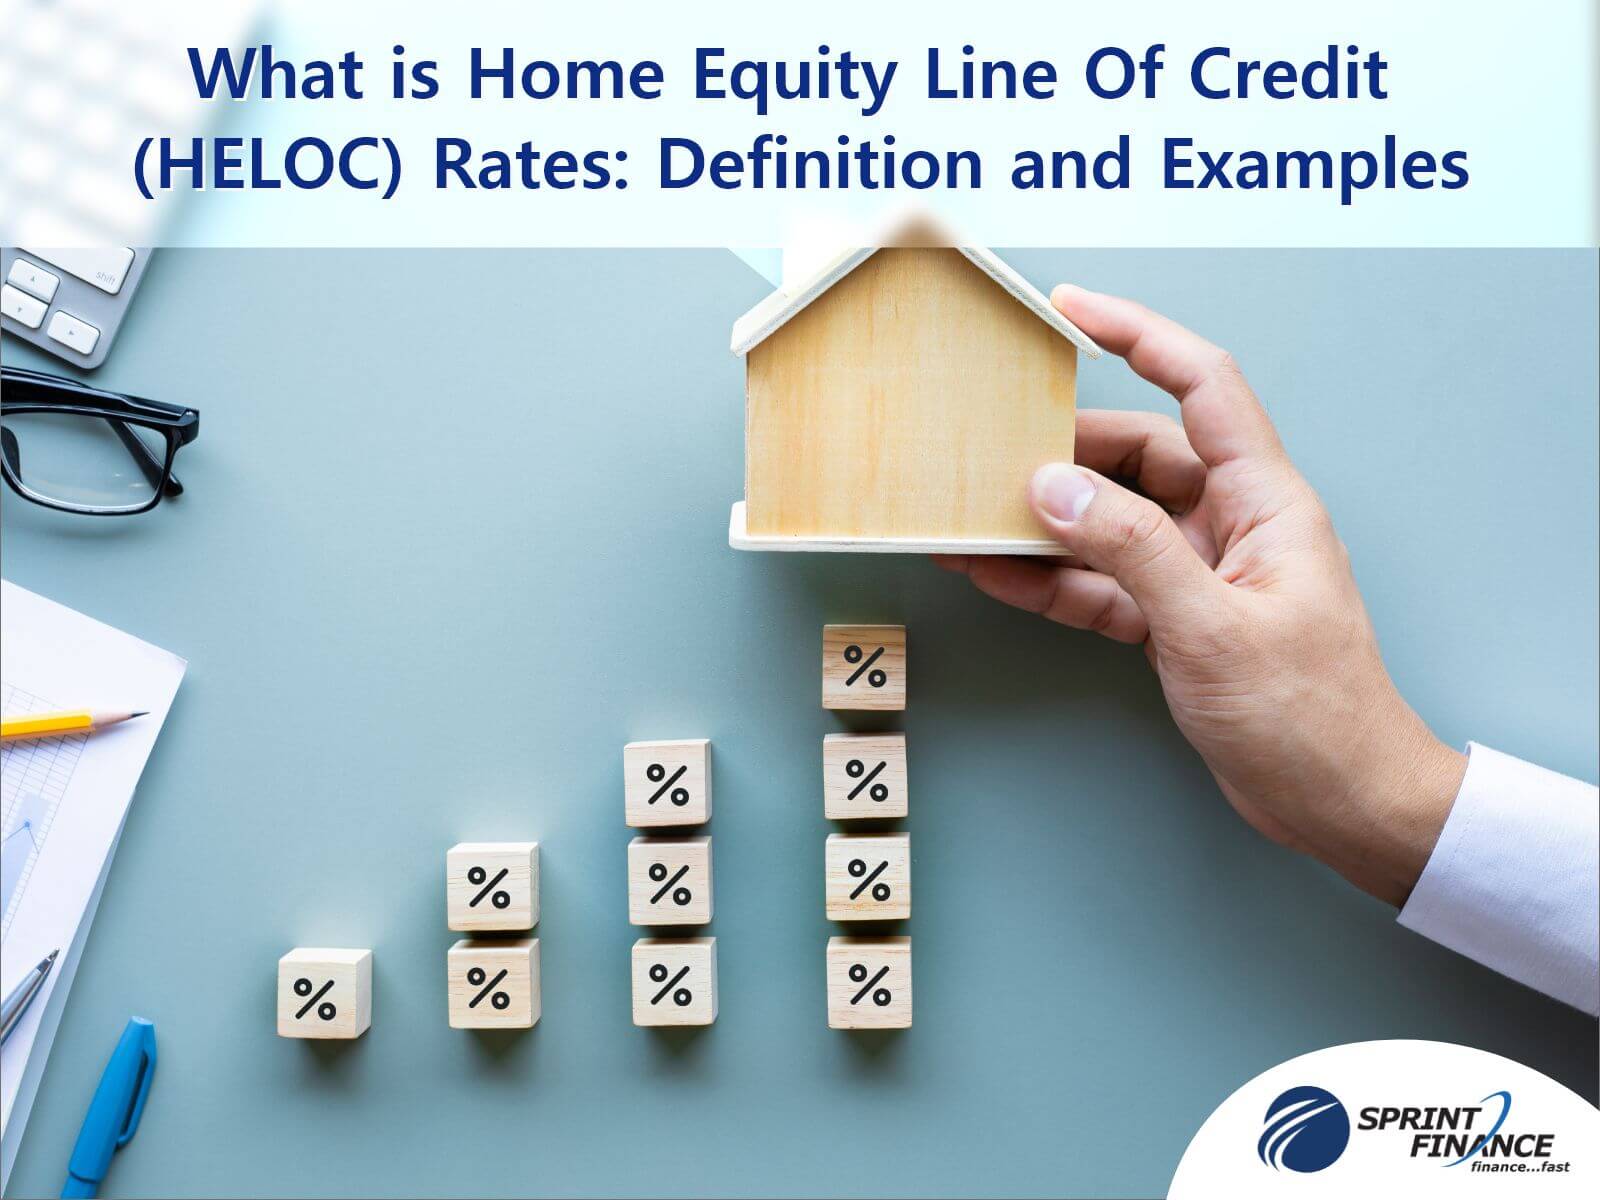 What is Home Equity Line Of Credit (HELOC) Rates: Definition and